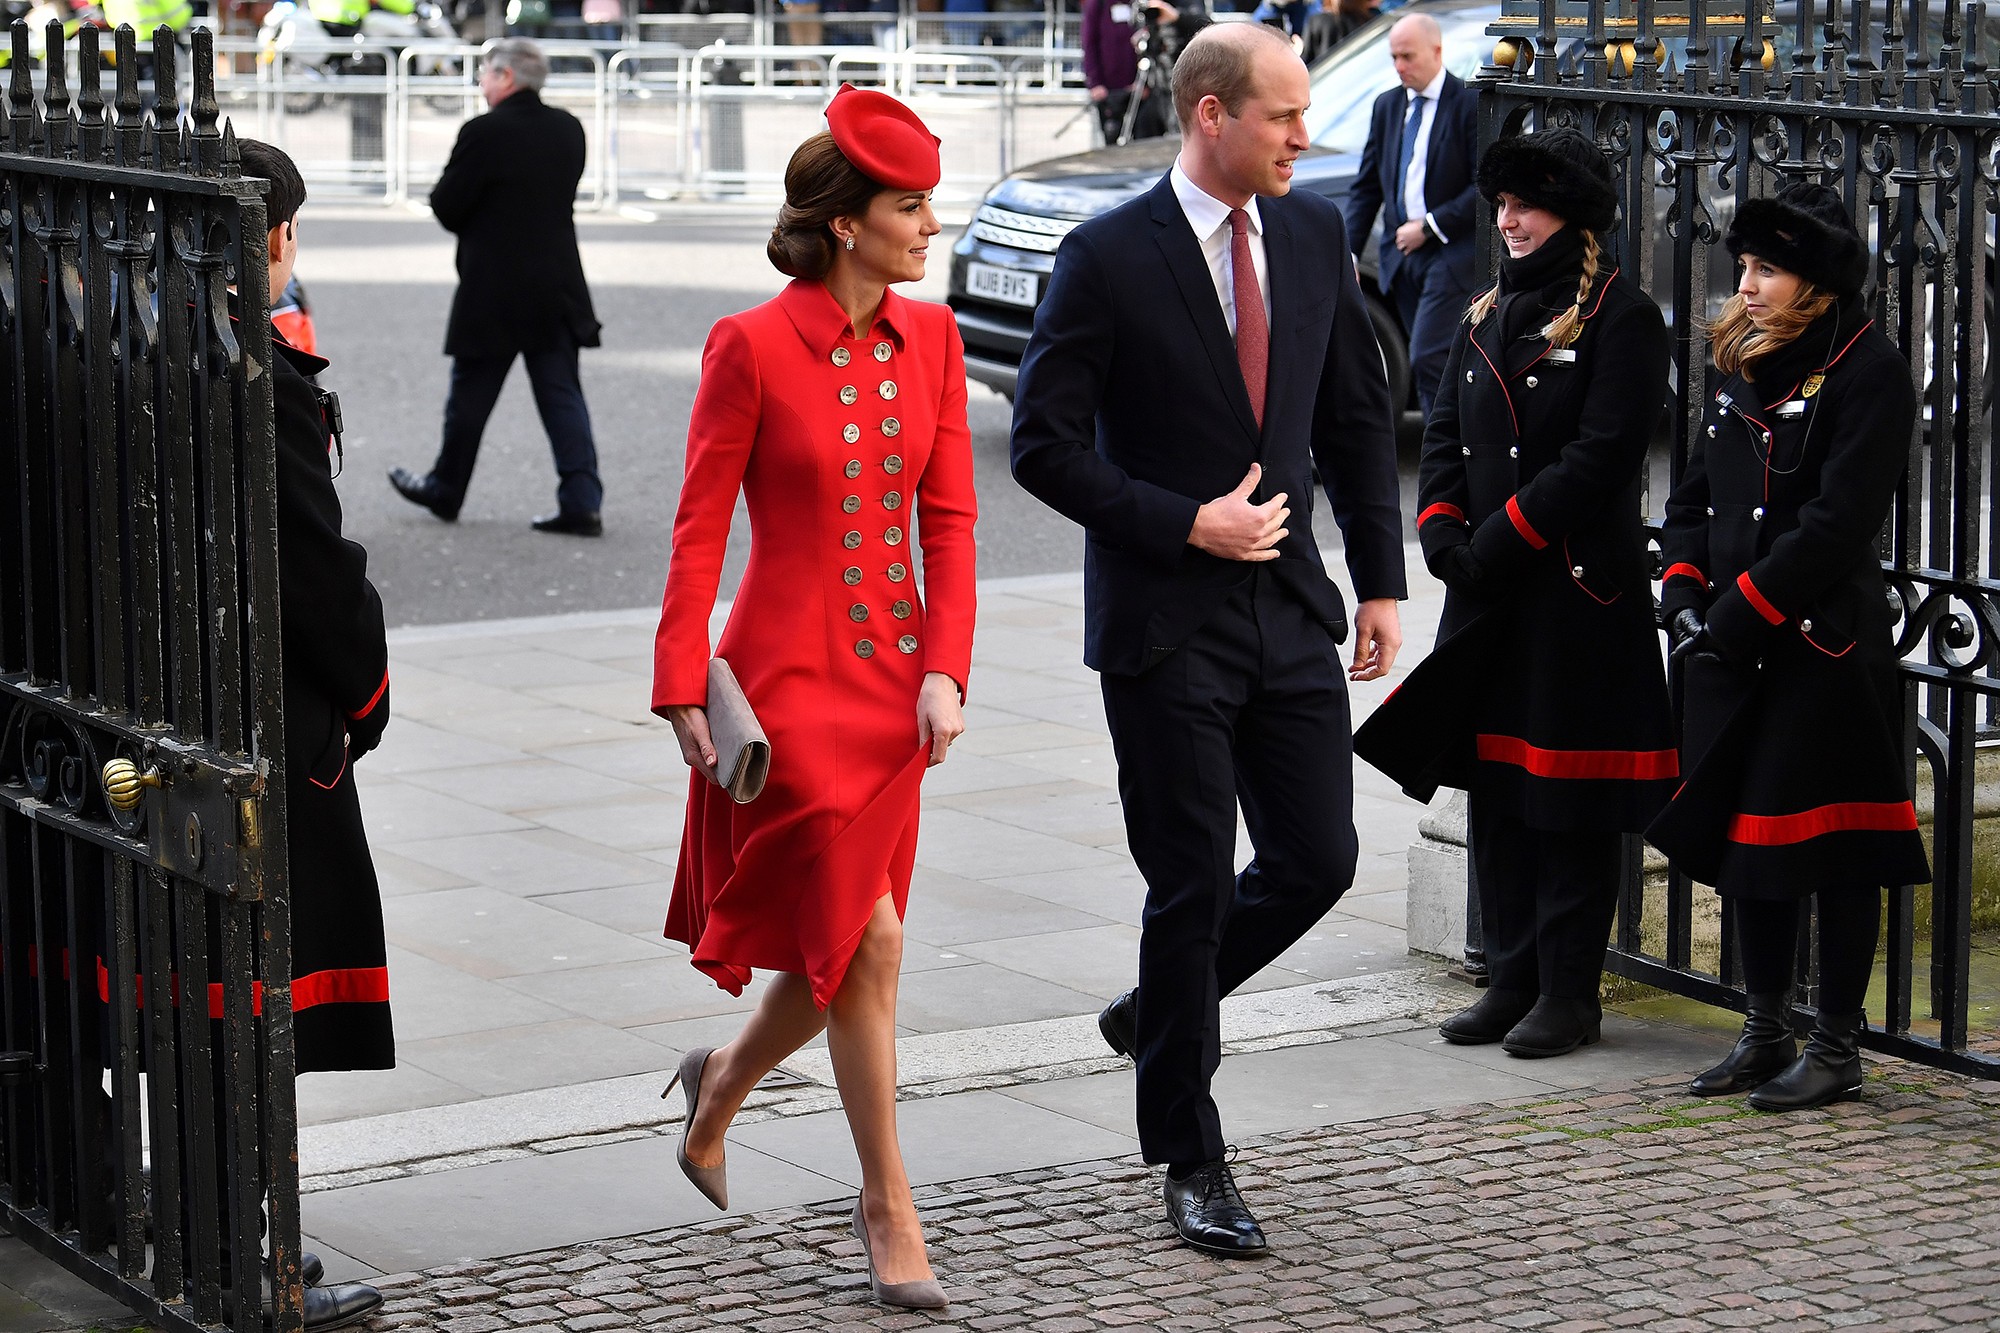 Britain's Prince William, Duke of Cambridge (R) and Britain's Catherine, Duchess of Cambridge (L) arrive to attend a Commonwealth Day Service at Westminster Abbey in central London, on March 11, 2019. - Britain's Queen Elizabeth II has been the Head of th (Foto: AFP/Getty Images)